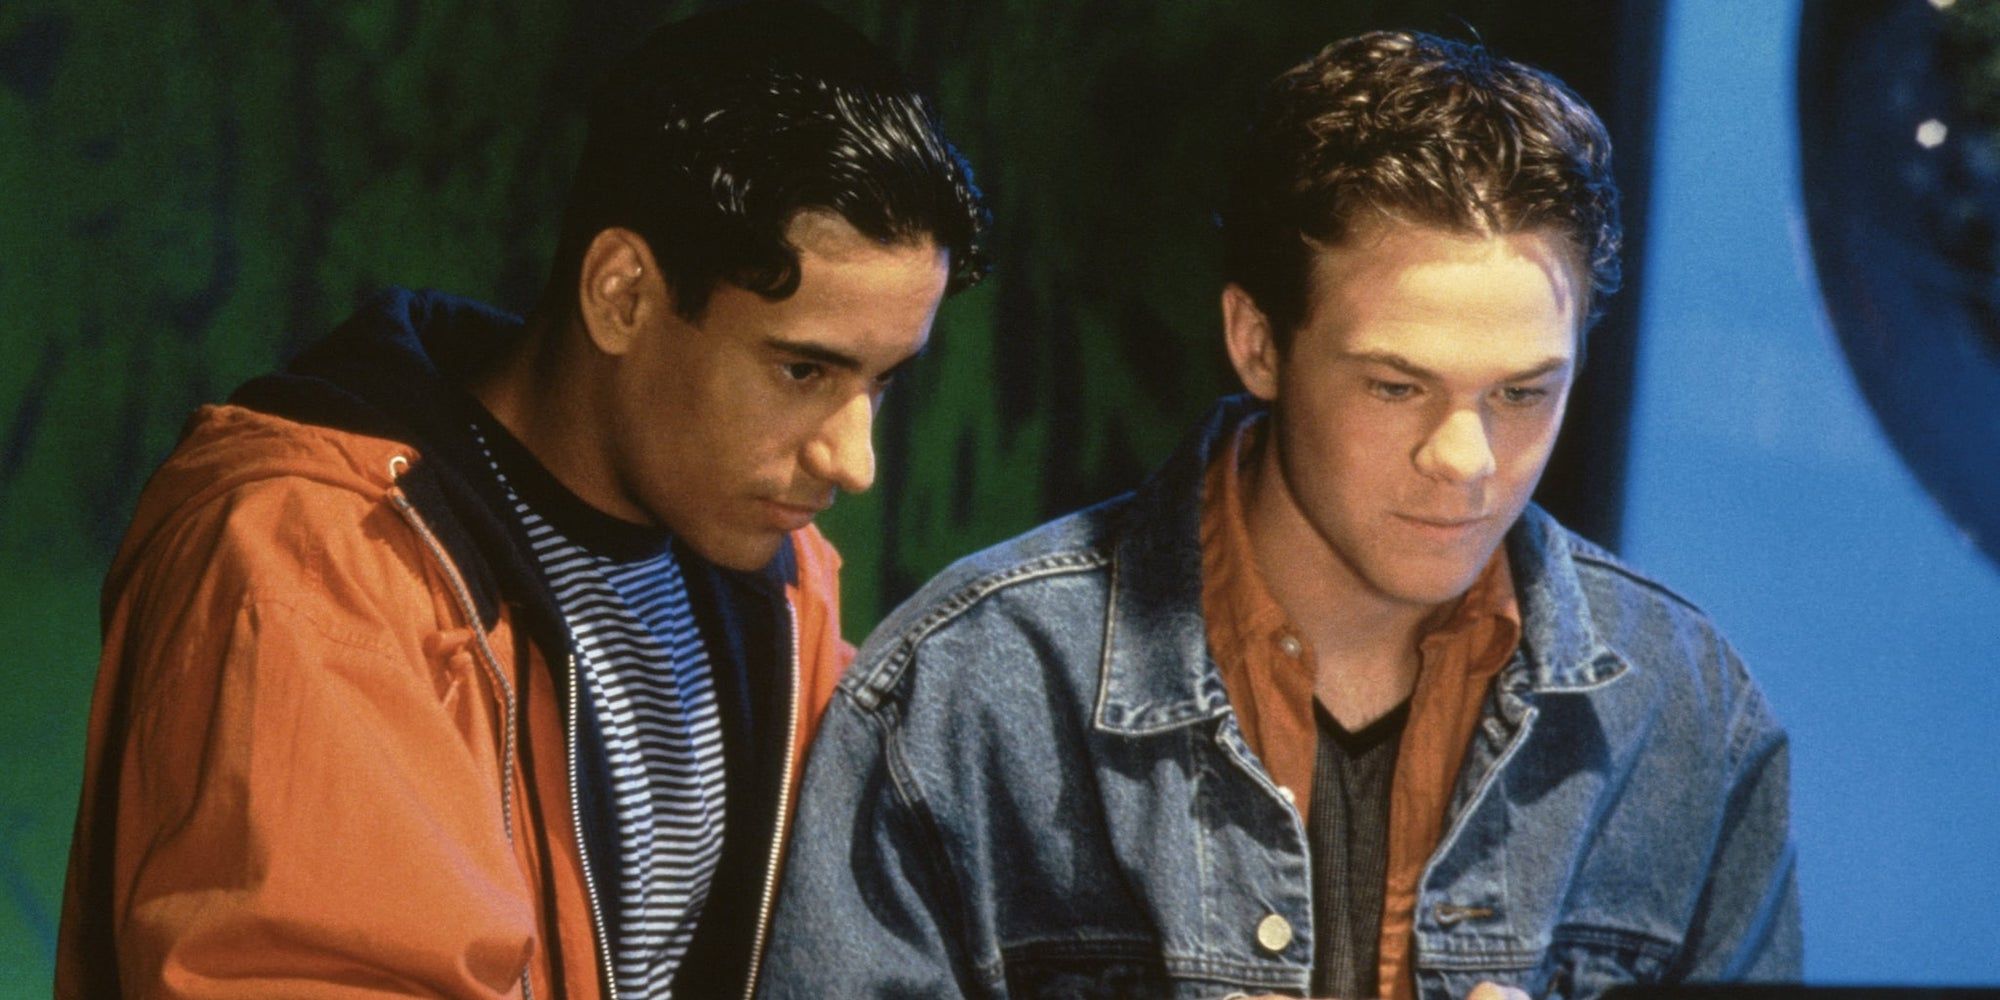 Shawn Ashmore as Jake and Boris Cabrera as Marco in Animorphs